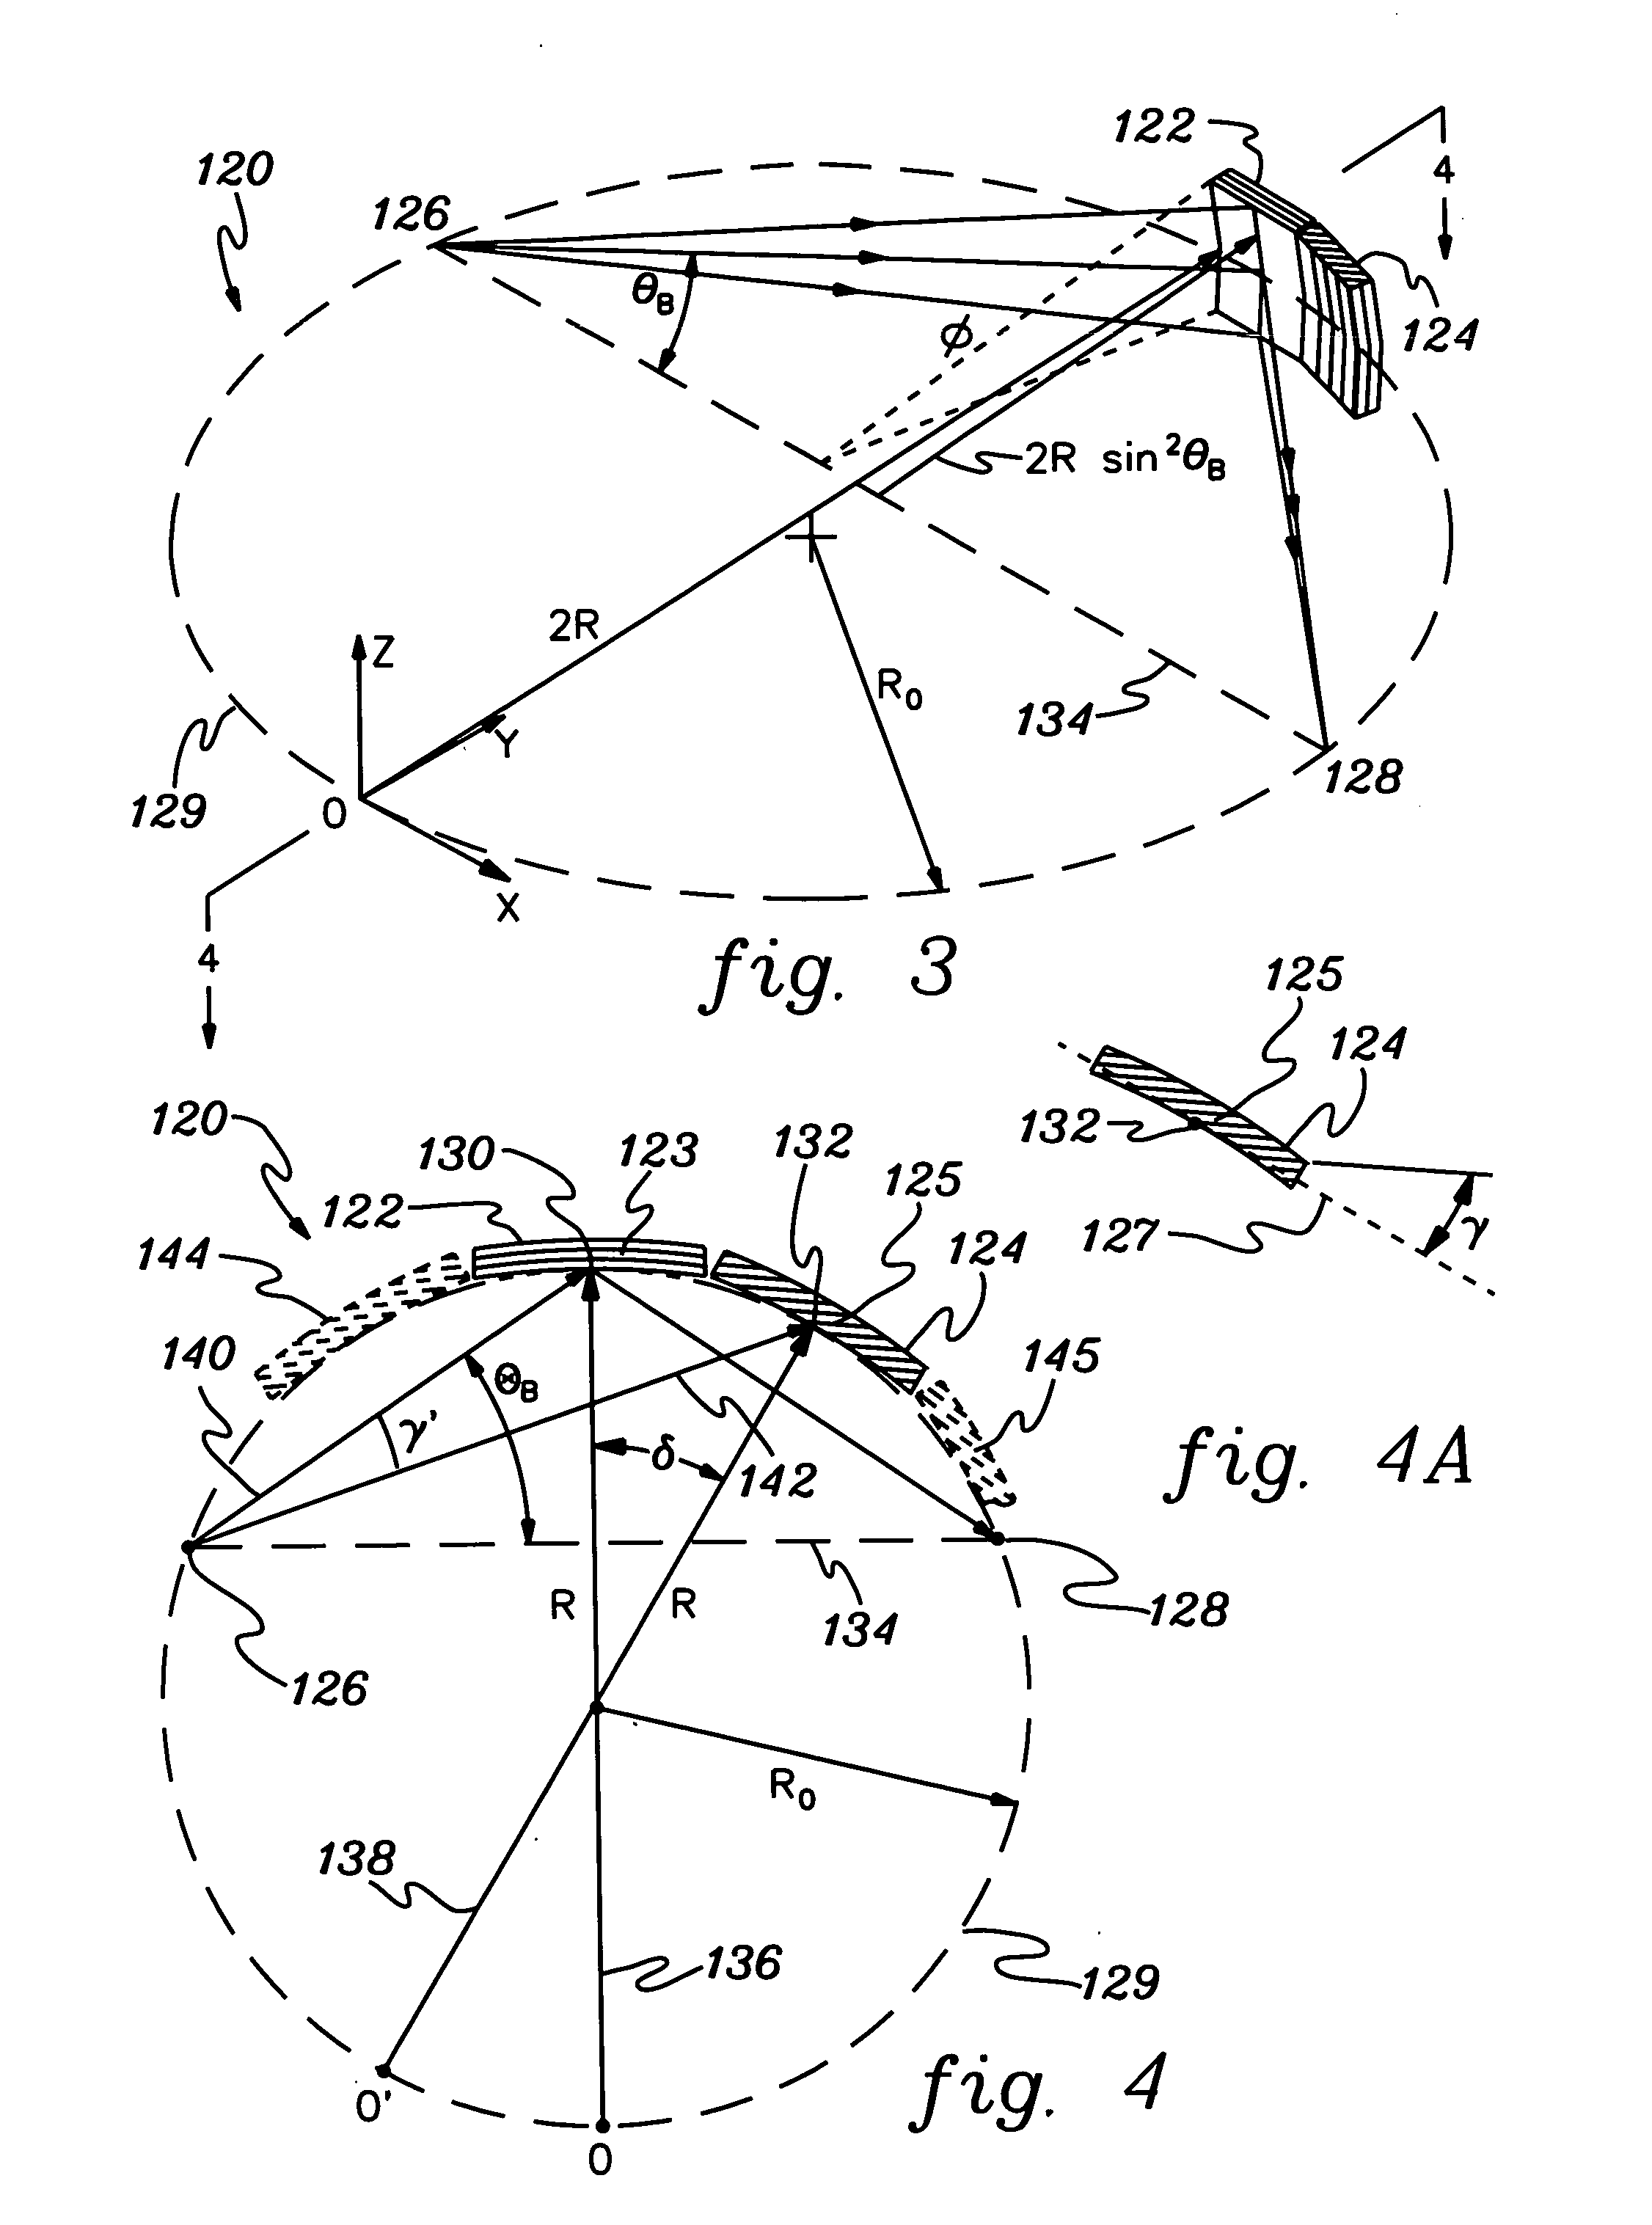 Optical device for directing x-rays having a plurality of optical crystals